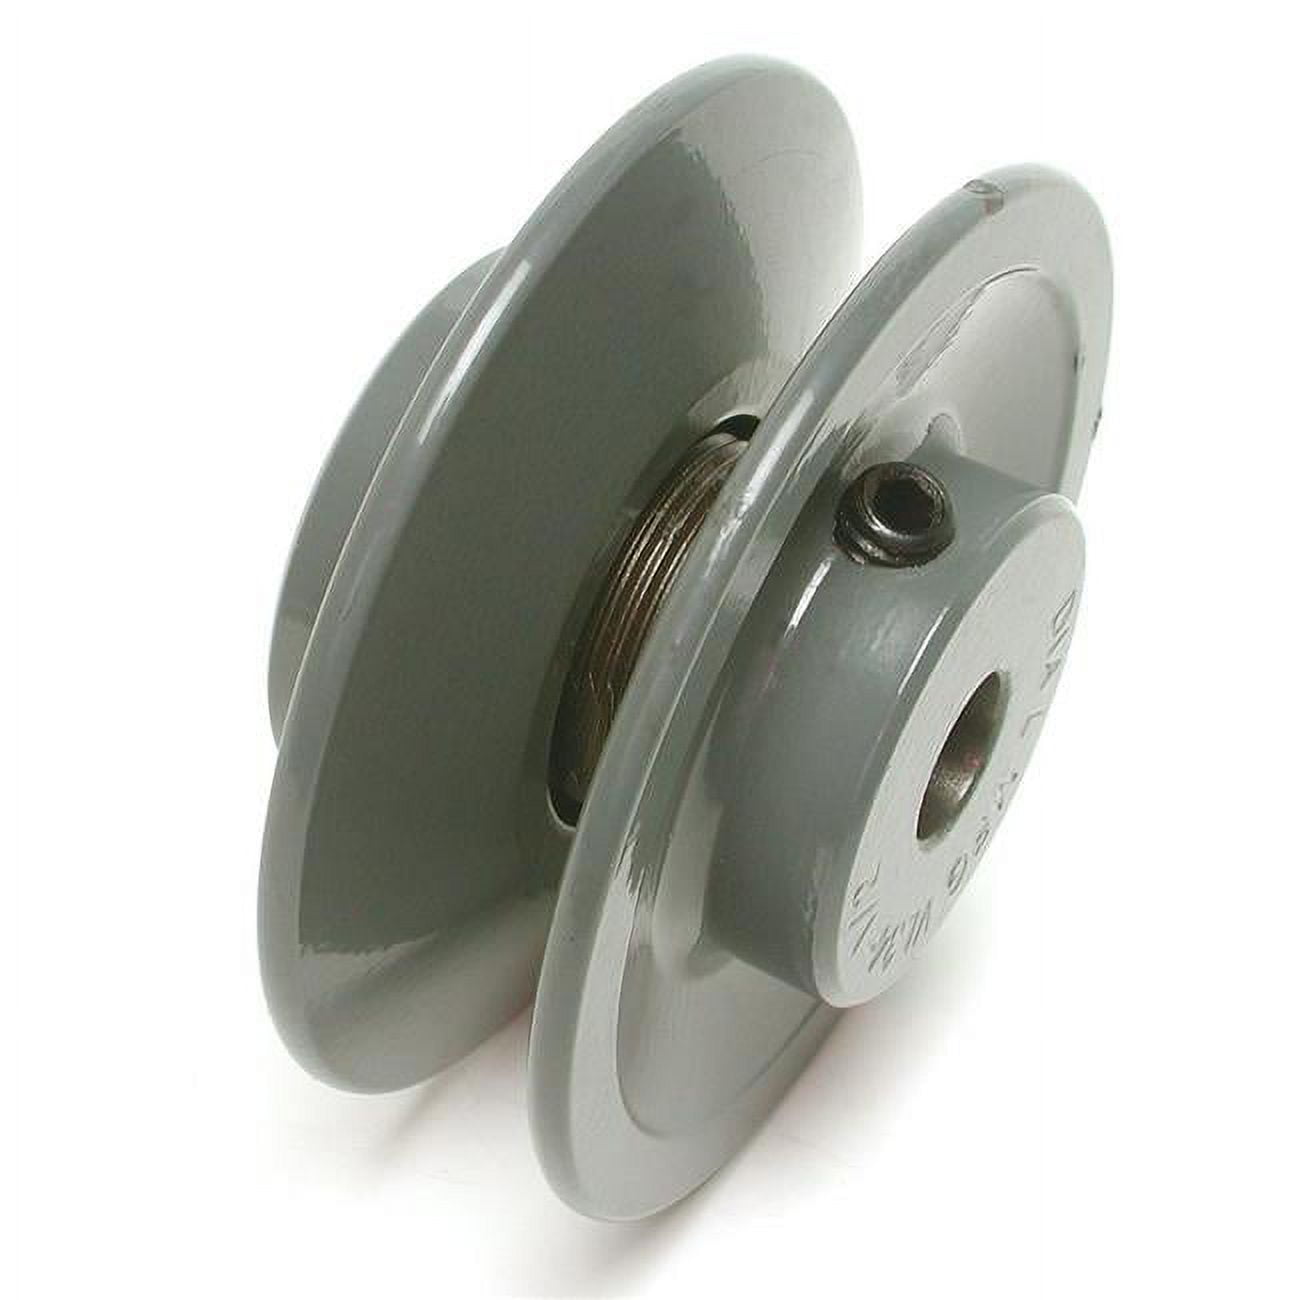 4515003 3.25 X 0.5 In. Plastic Iron Pulley